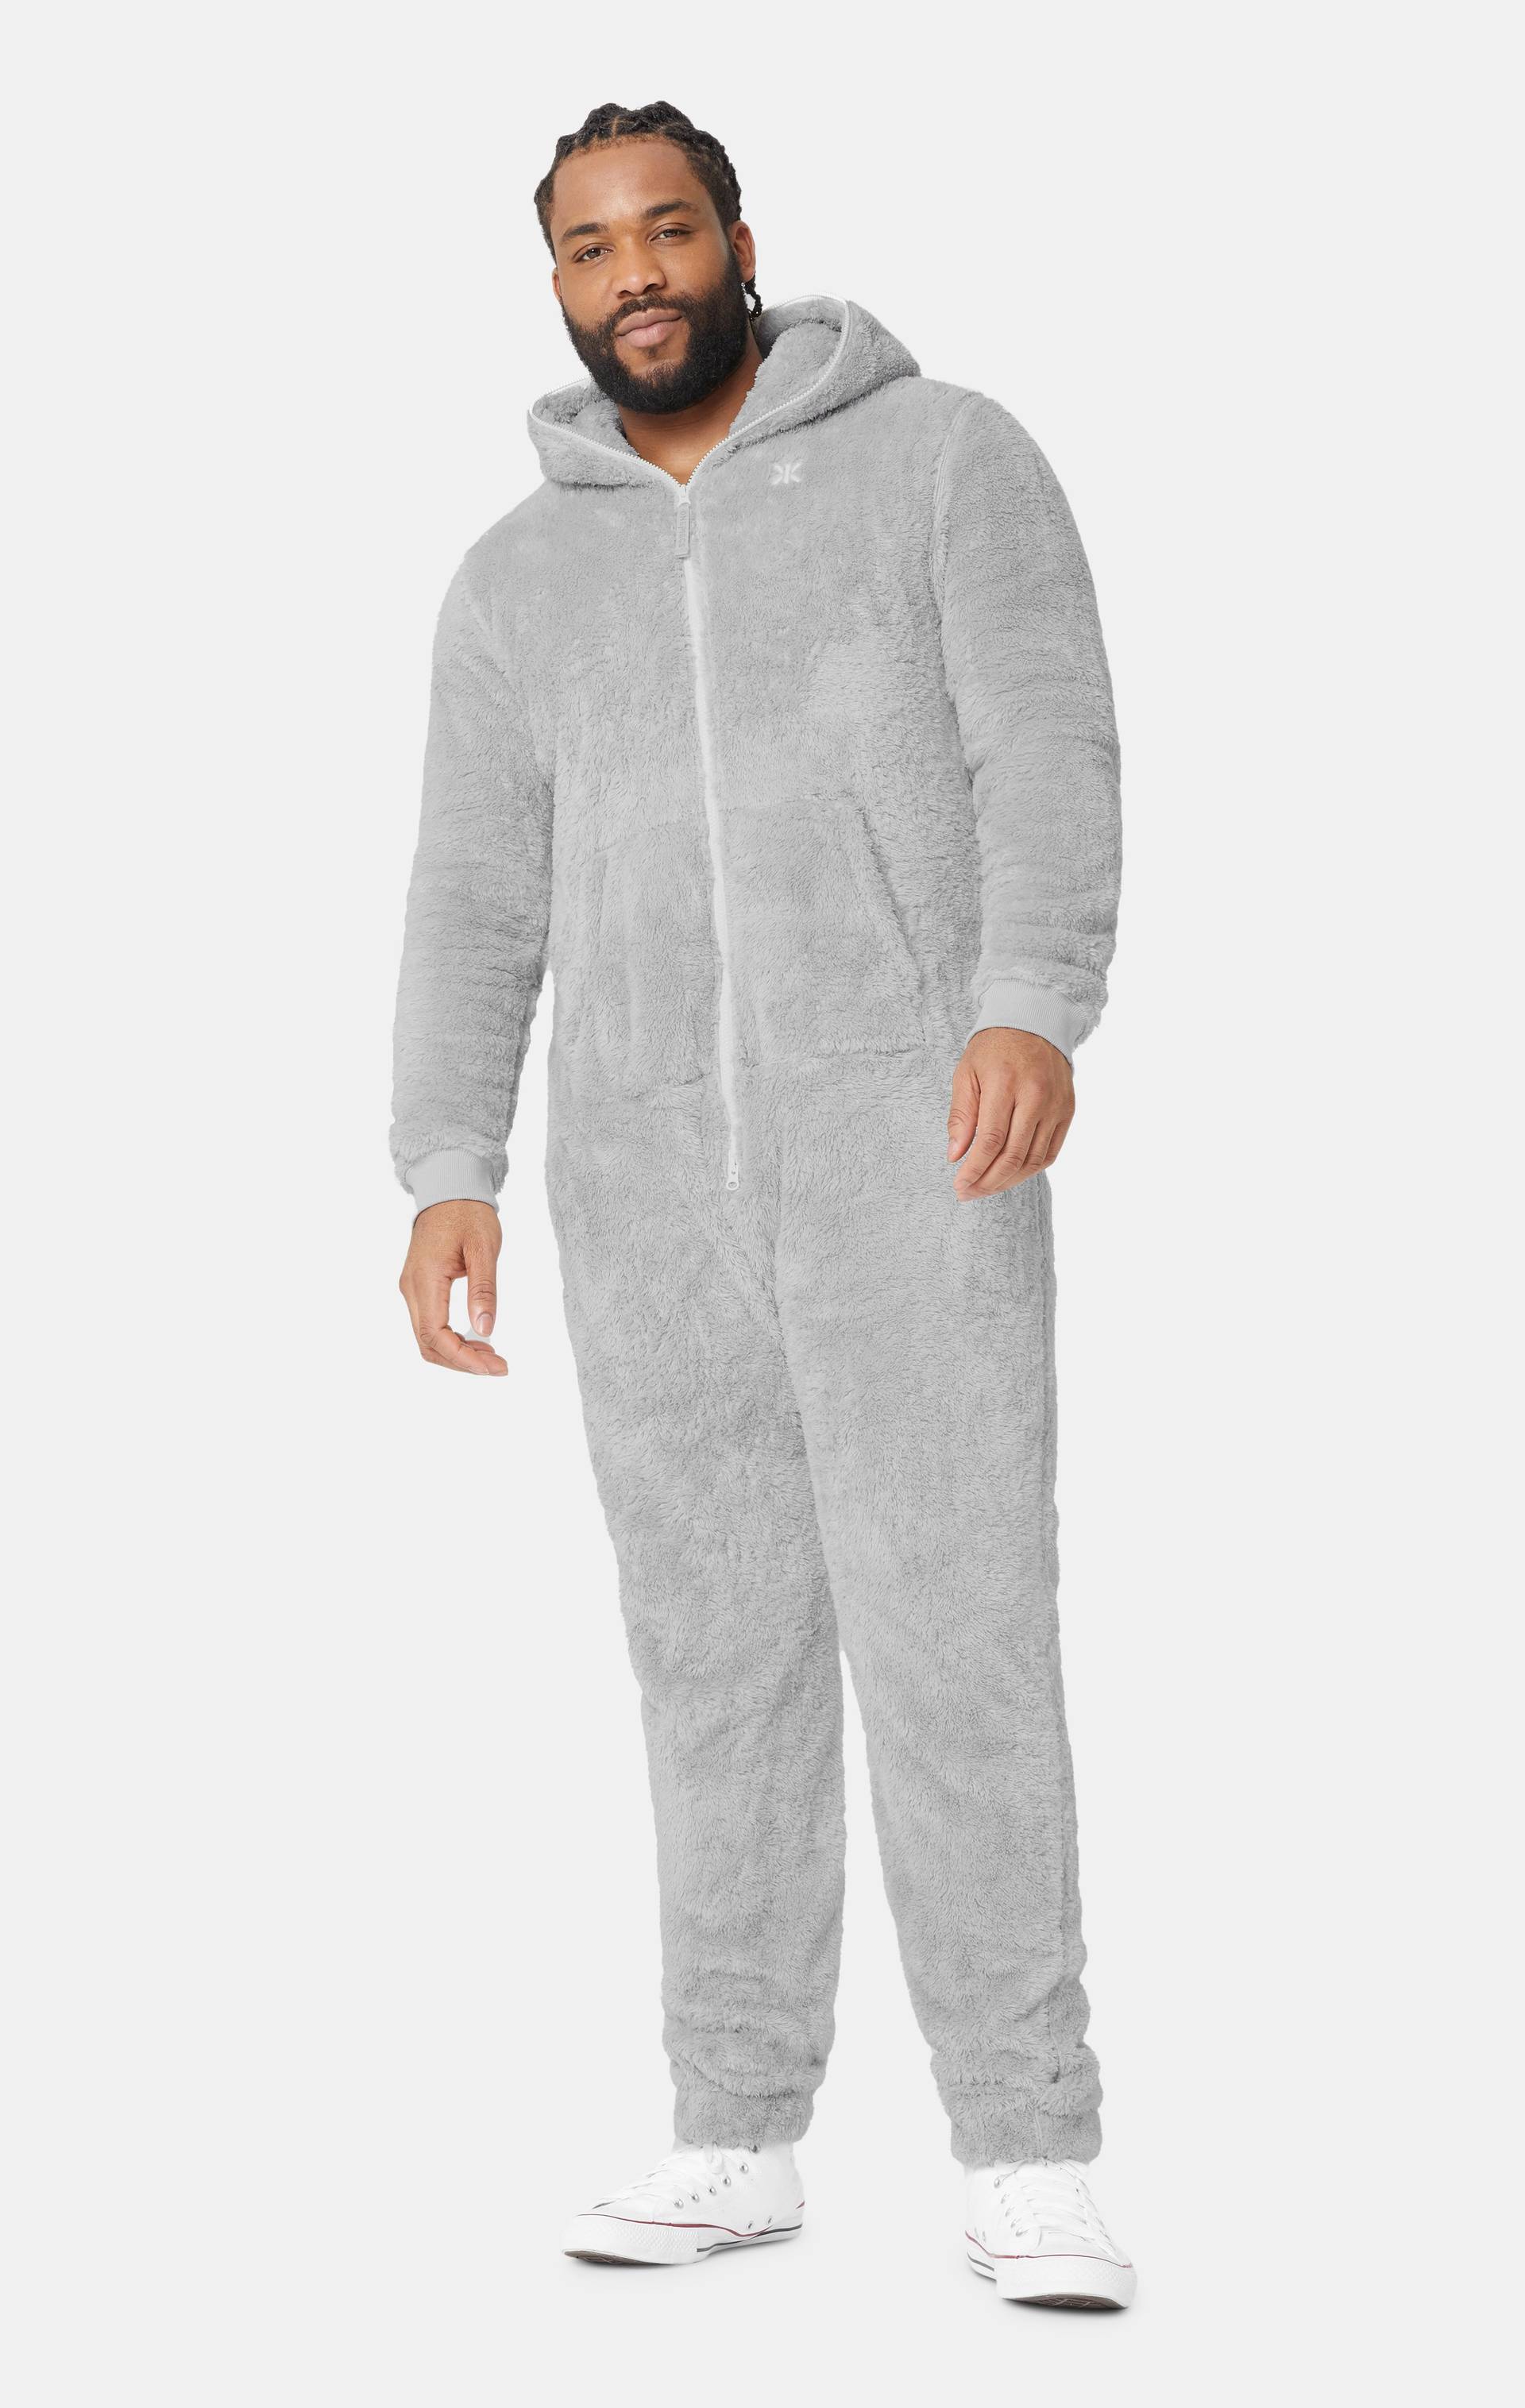 Onepiece The Puppy Jumpsuit Light Grey - 6